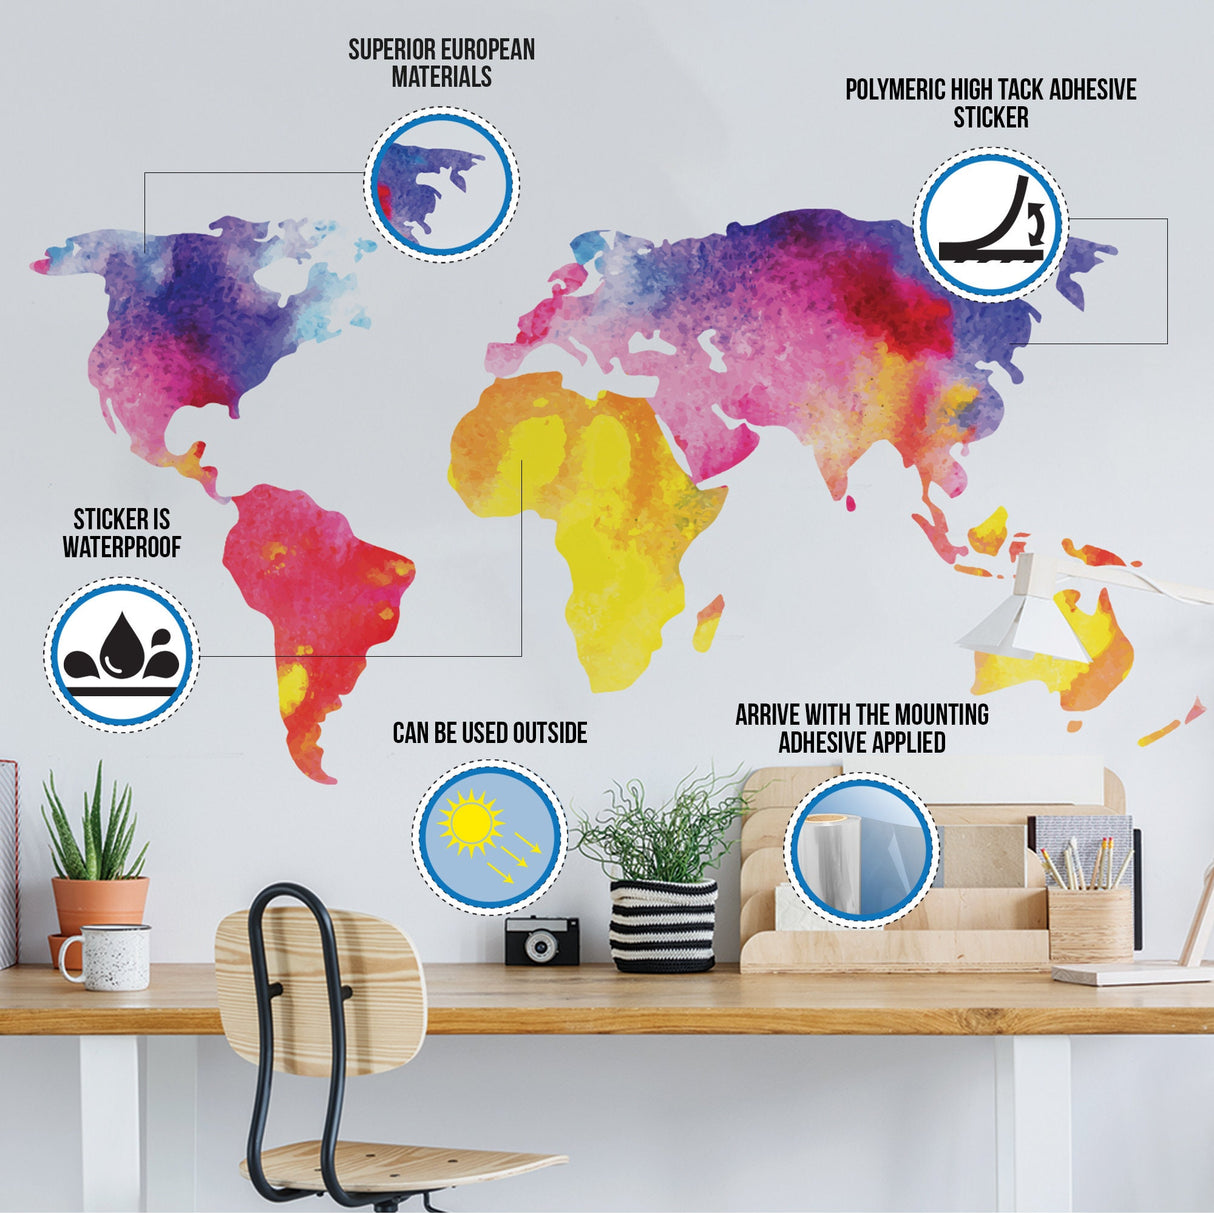 Custom Vinyl Wall Stickers: Boost Your Creative Expression - Personalized Wall Decals